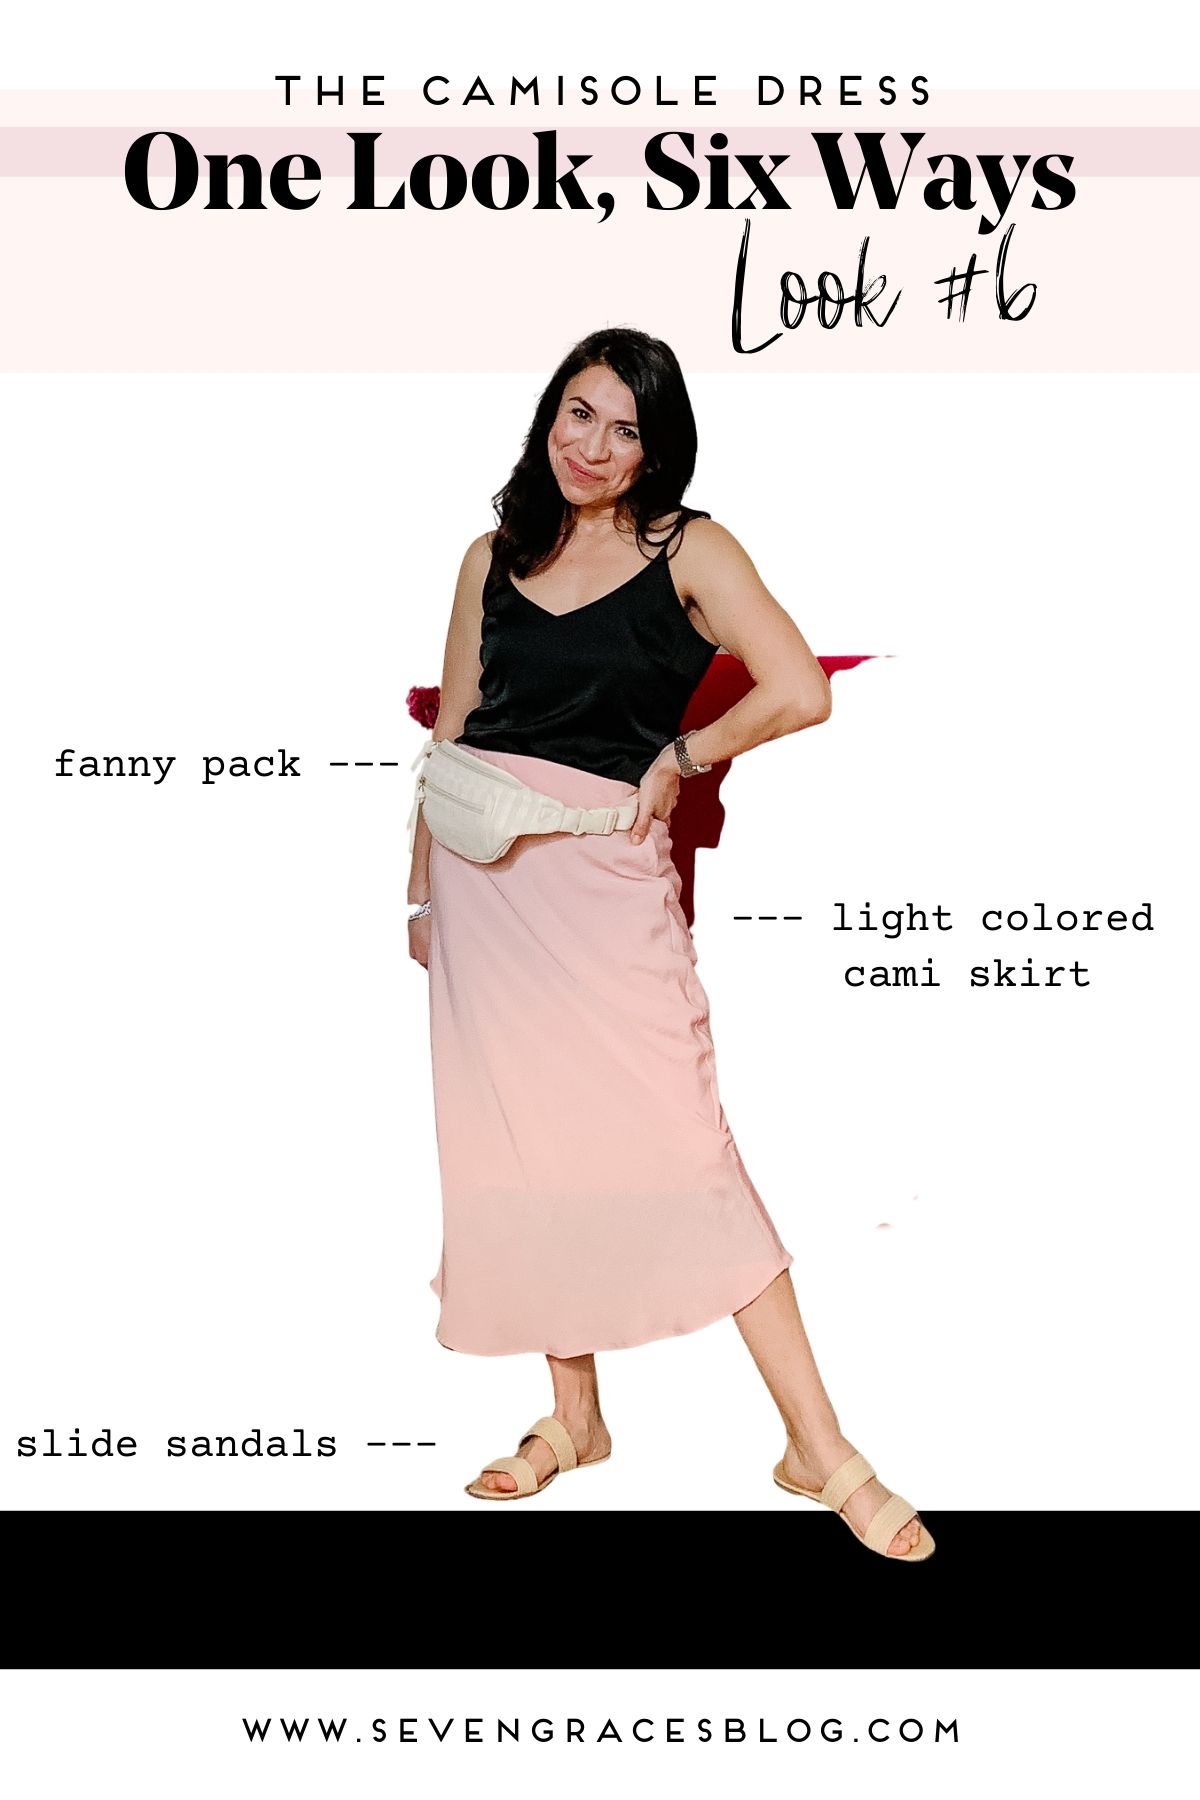 The Camisole Dress: One Look, Six Ways. How to style a cami dress / slip dress six ways! Go from winter to spring in this one!